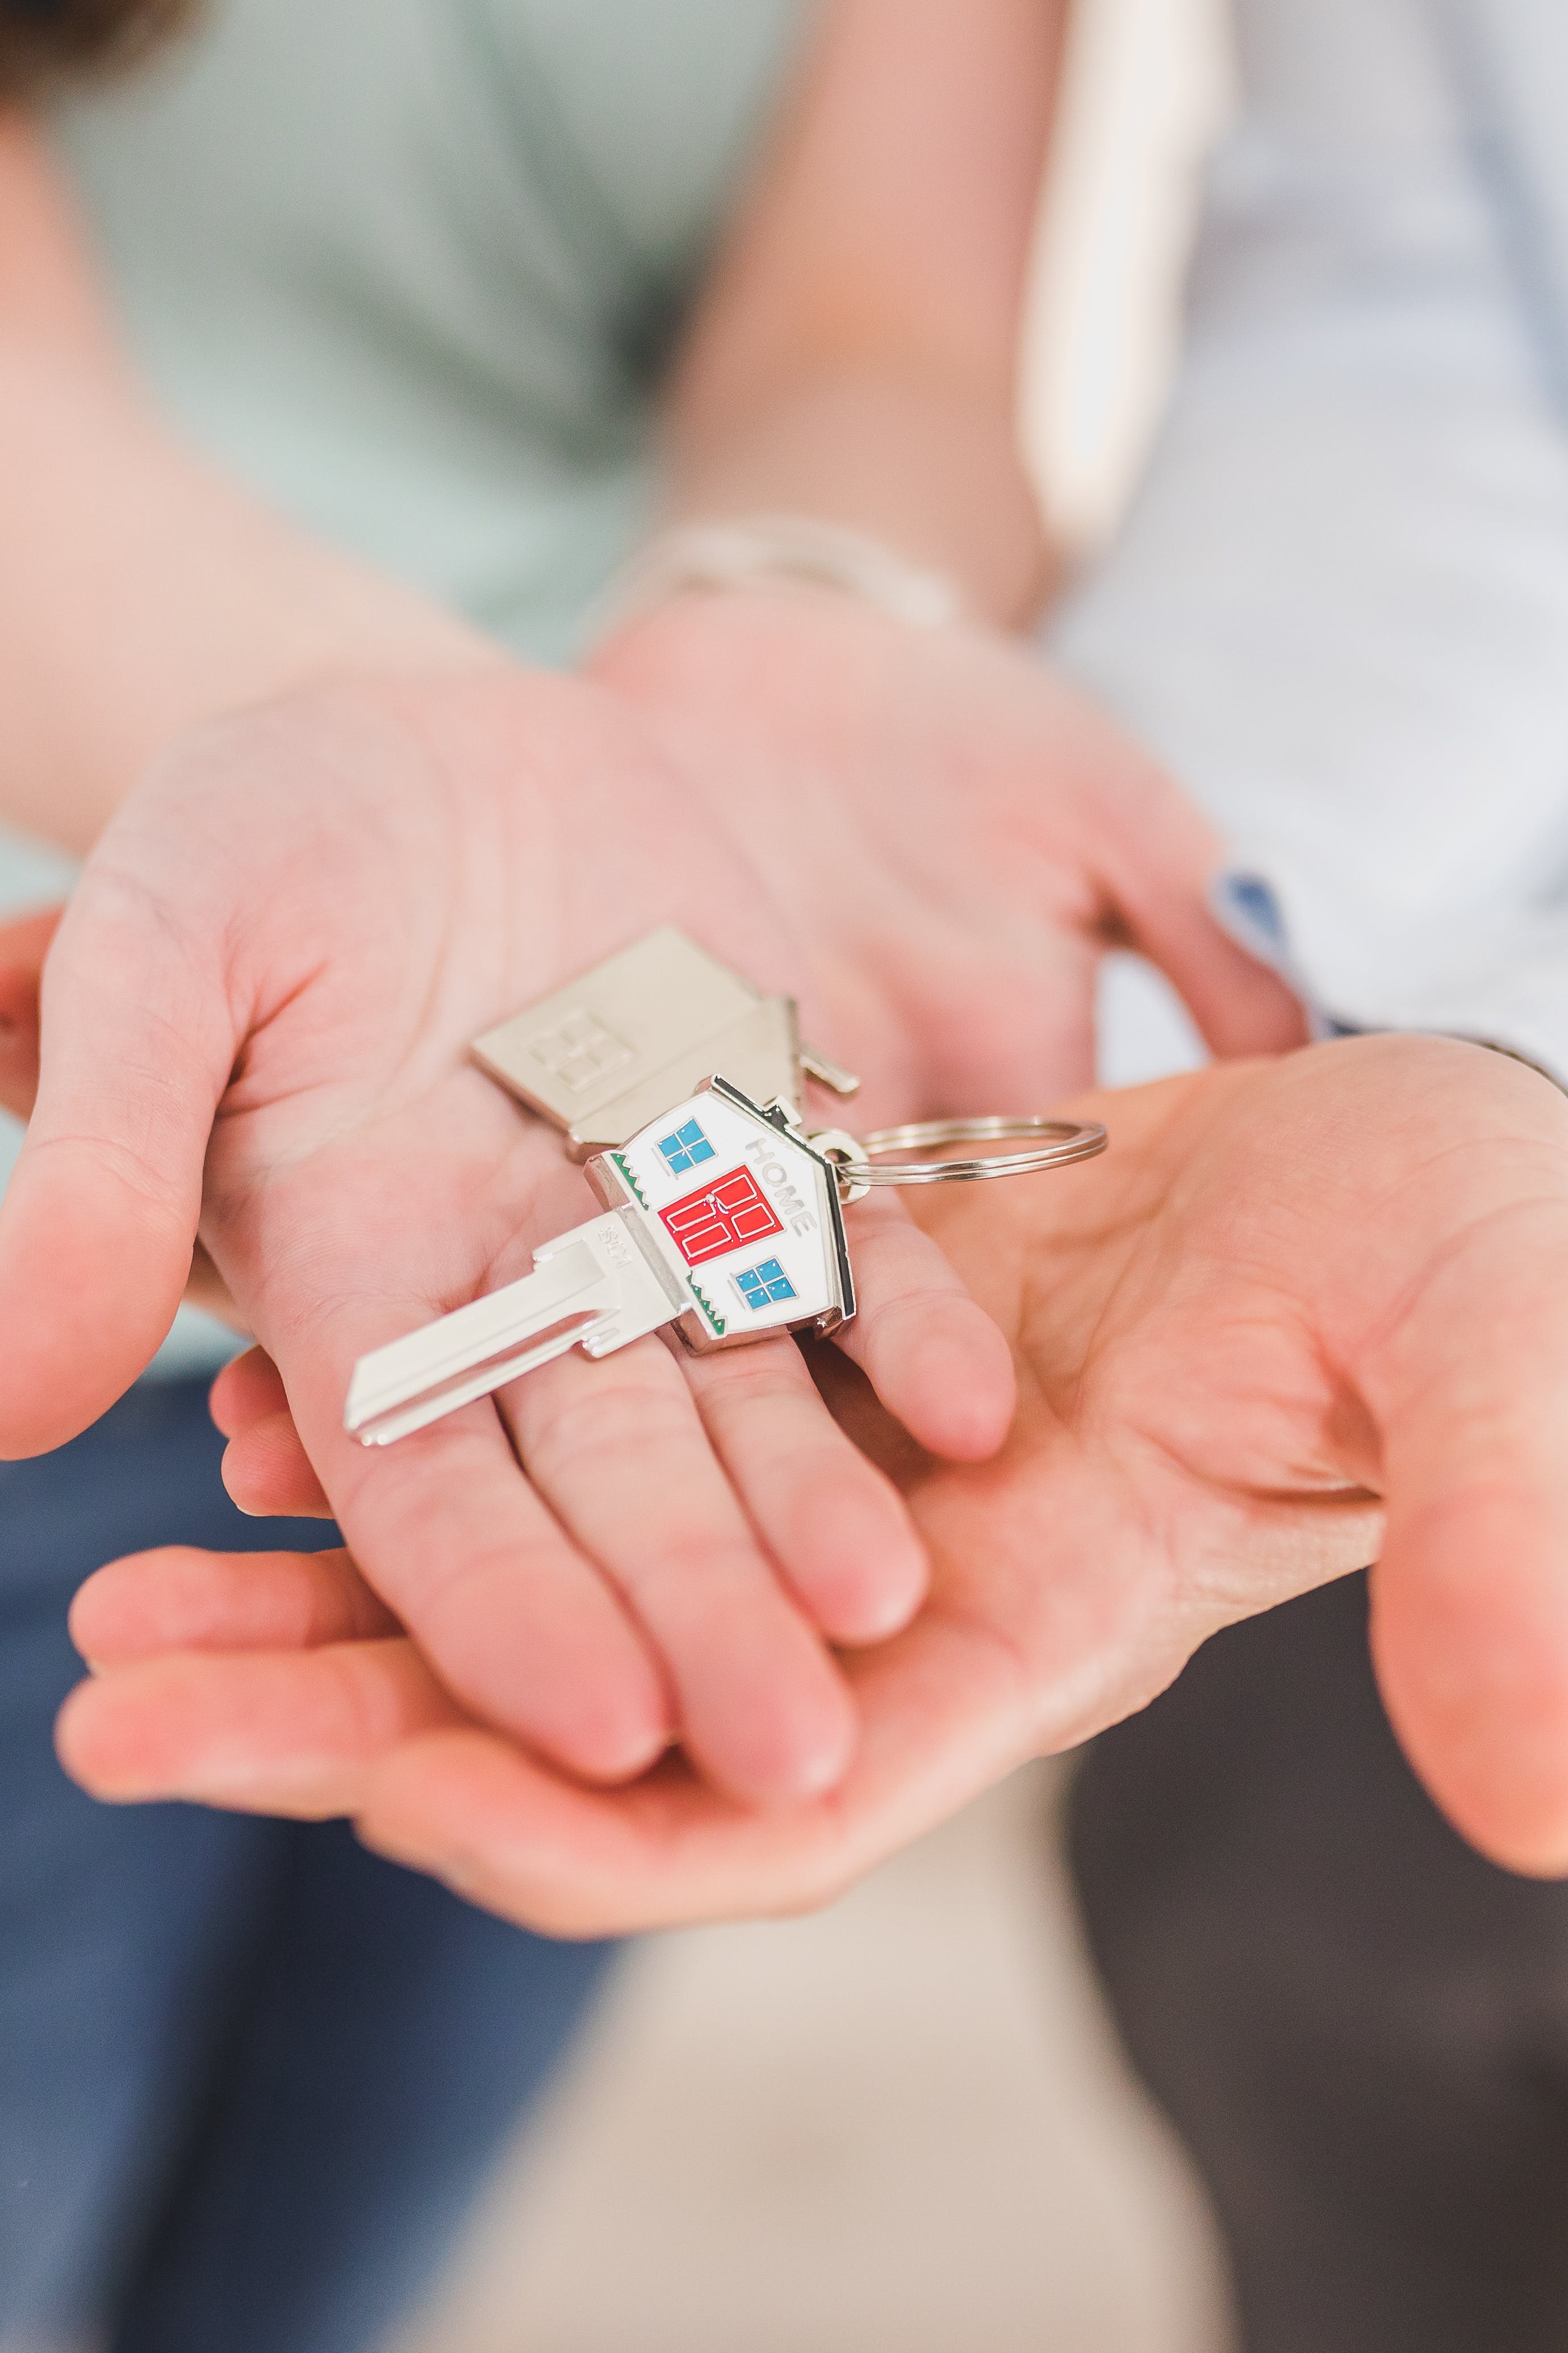 Two hands holding a set of keys with a house-shaped keychain, symbolizing home ownership or real estate purchase.